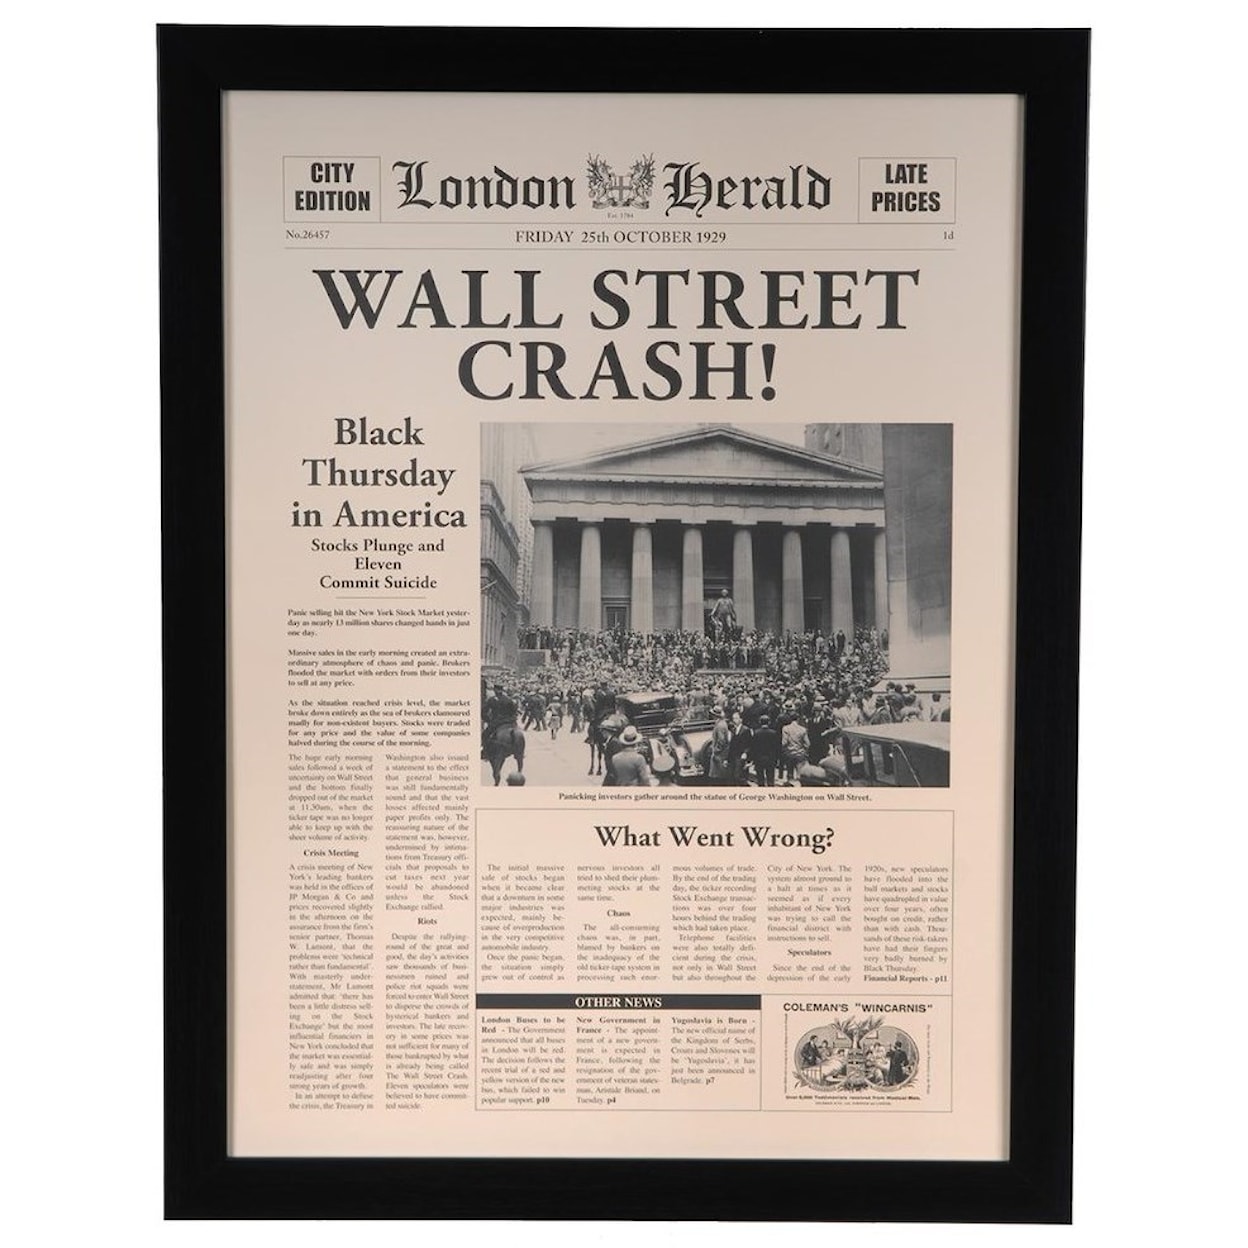 Crestview Collection Prints and Paintings Wall Street Crash